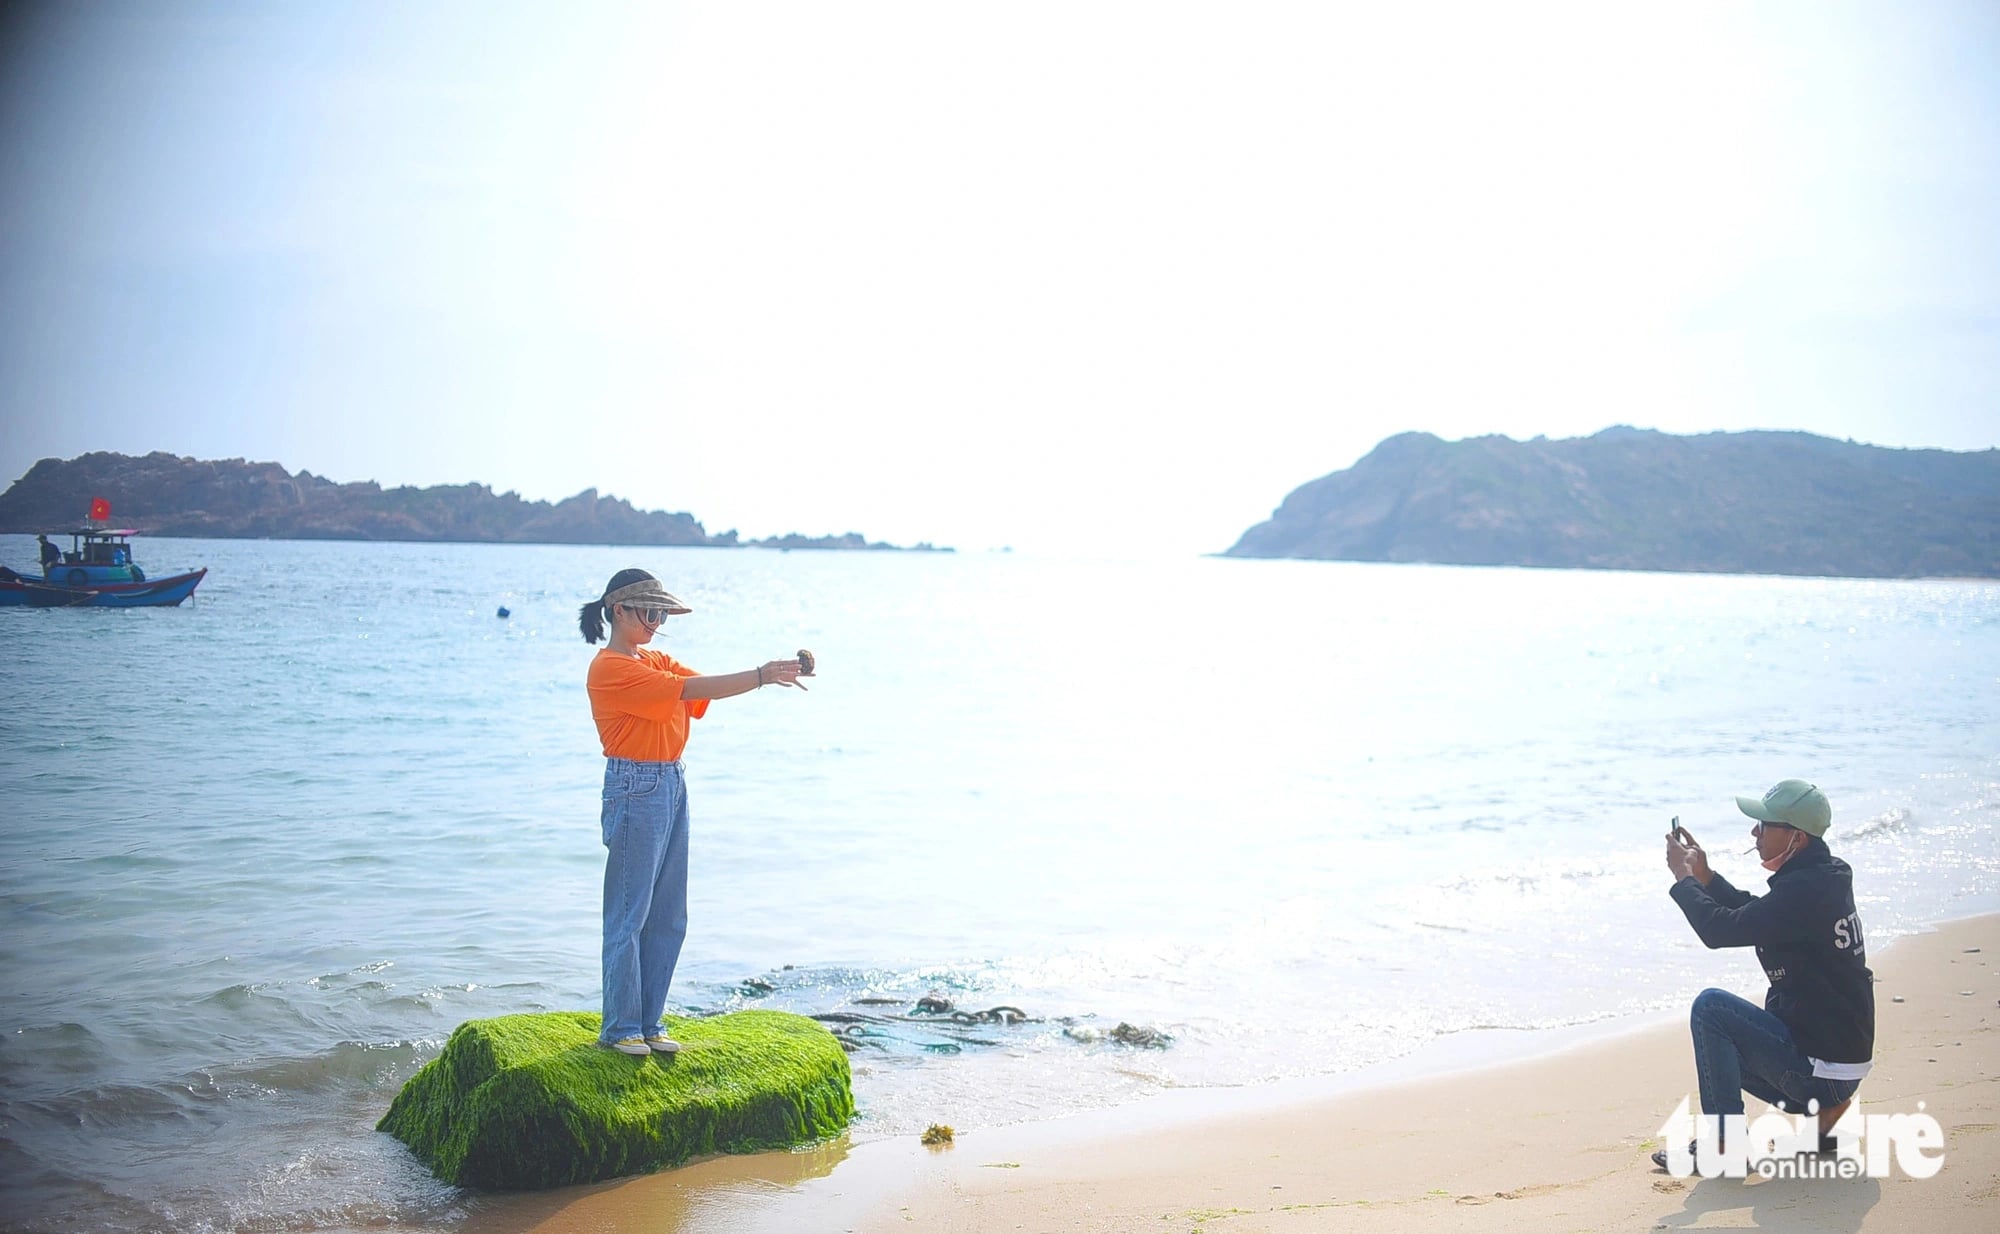 A man takes a photo of a woman while visiting a moss-covered reef at a beach in Nhon Hai Commune, Quy Nhon City, Binh Dinh Province, central Vietnam in this illustration photo. Photo: Lam Thien / Tuoi Tre